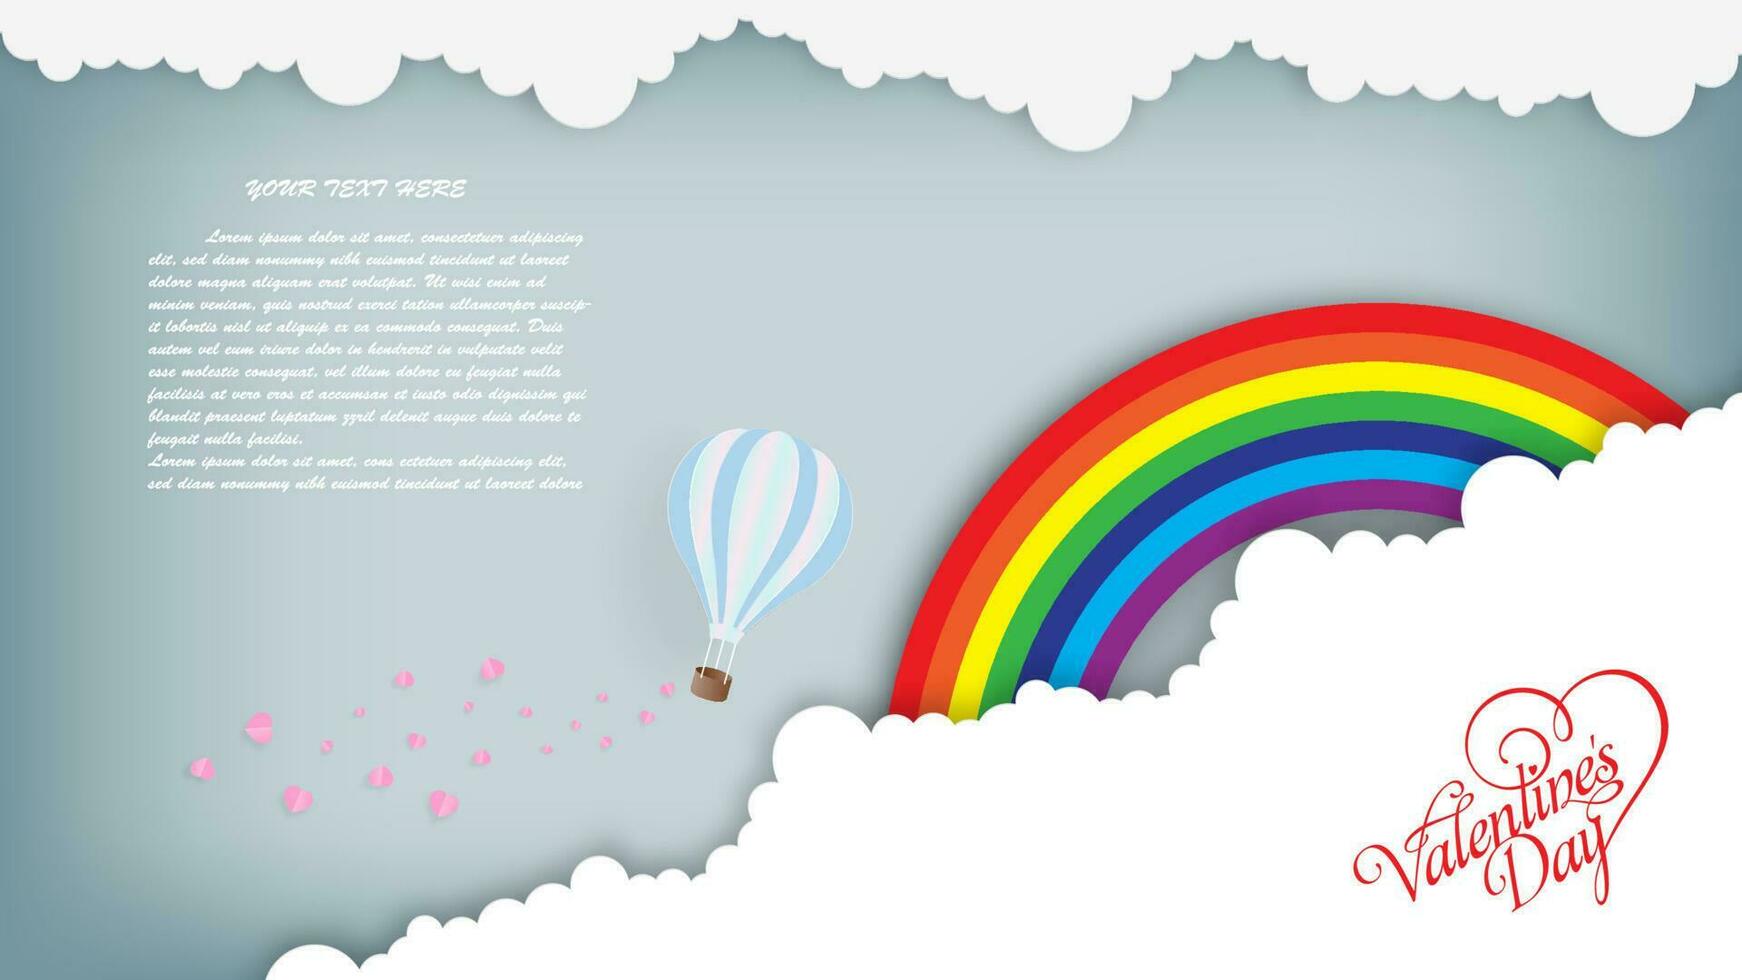 Rainbow on blue sky with cloud , paper art style Design illustration of view scene the sky on paper art style.vector, illustration. vector